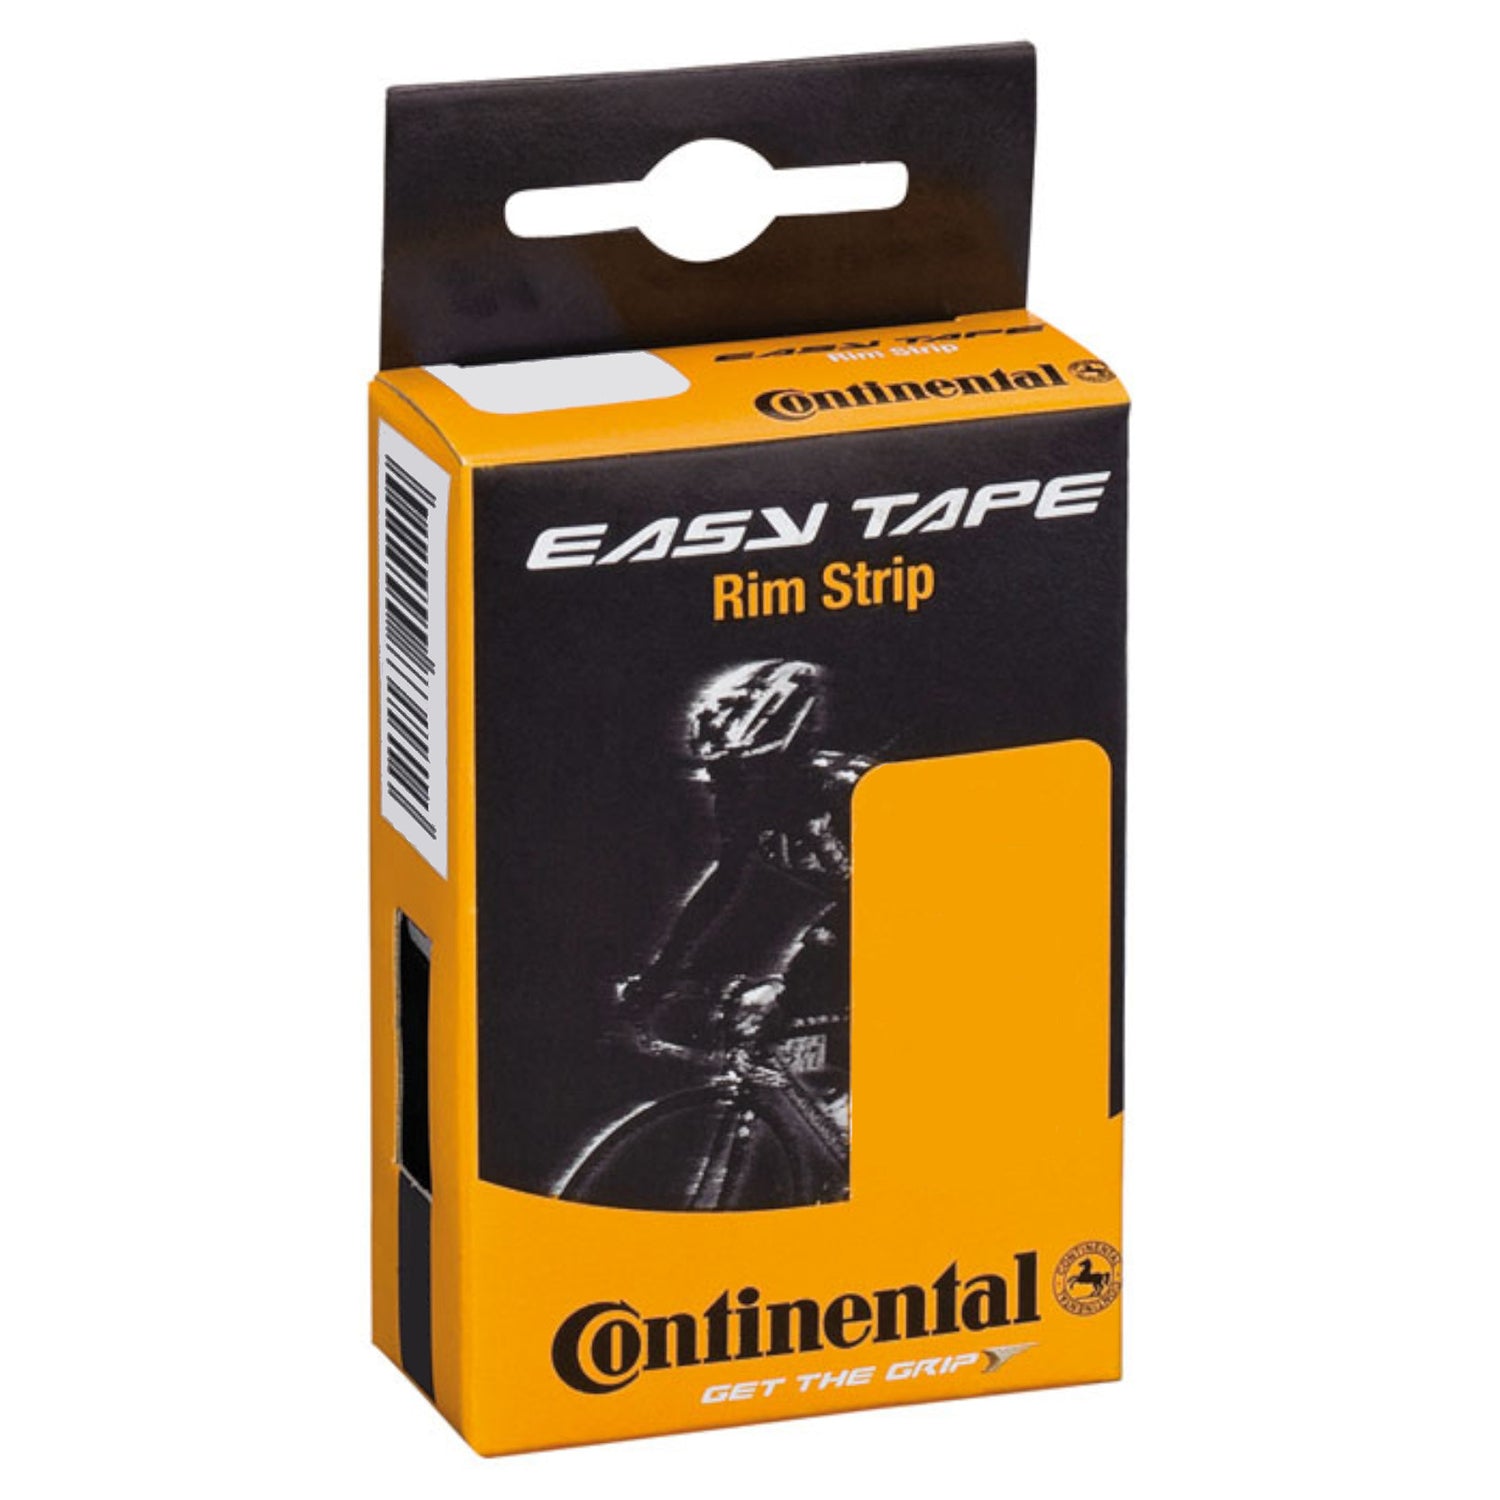 Continental Easy Tape - Rim Tape (Various Sizes)